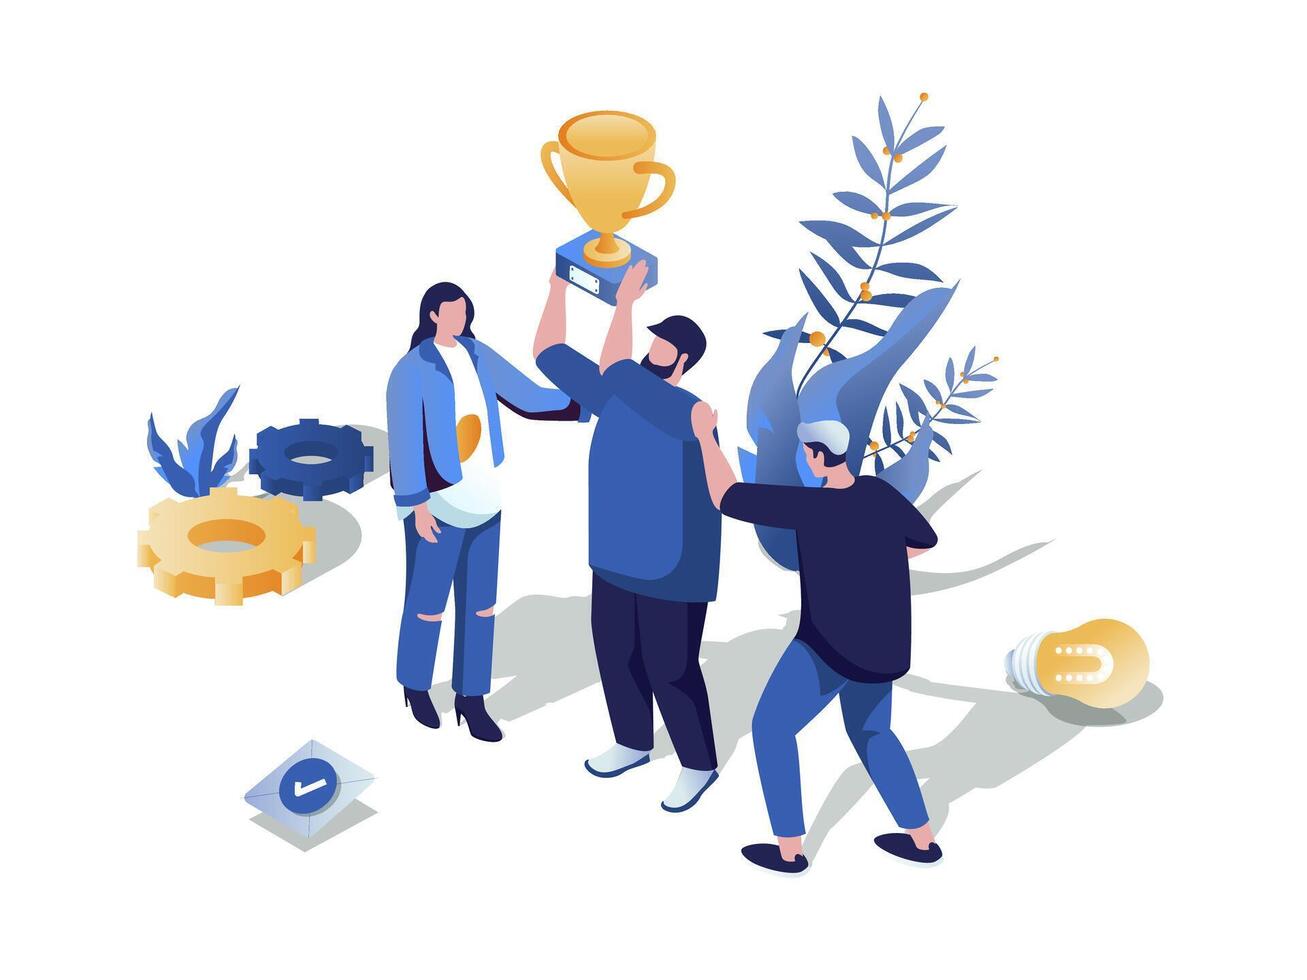 Support in team concept 3d isometric web scene. People working together and achieving career goals, winning trophy cup, partnership and leadership. Vector illustration in isometry graphic design